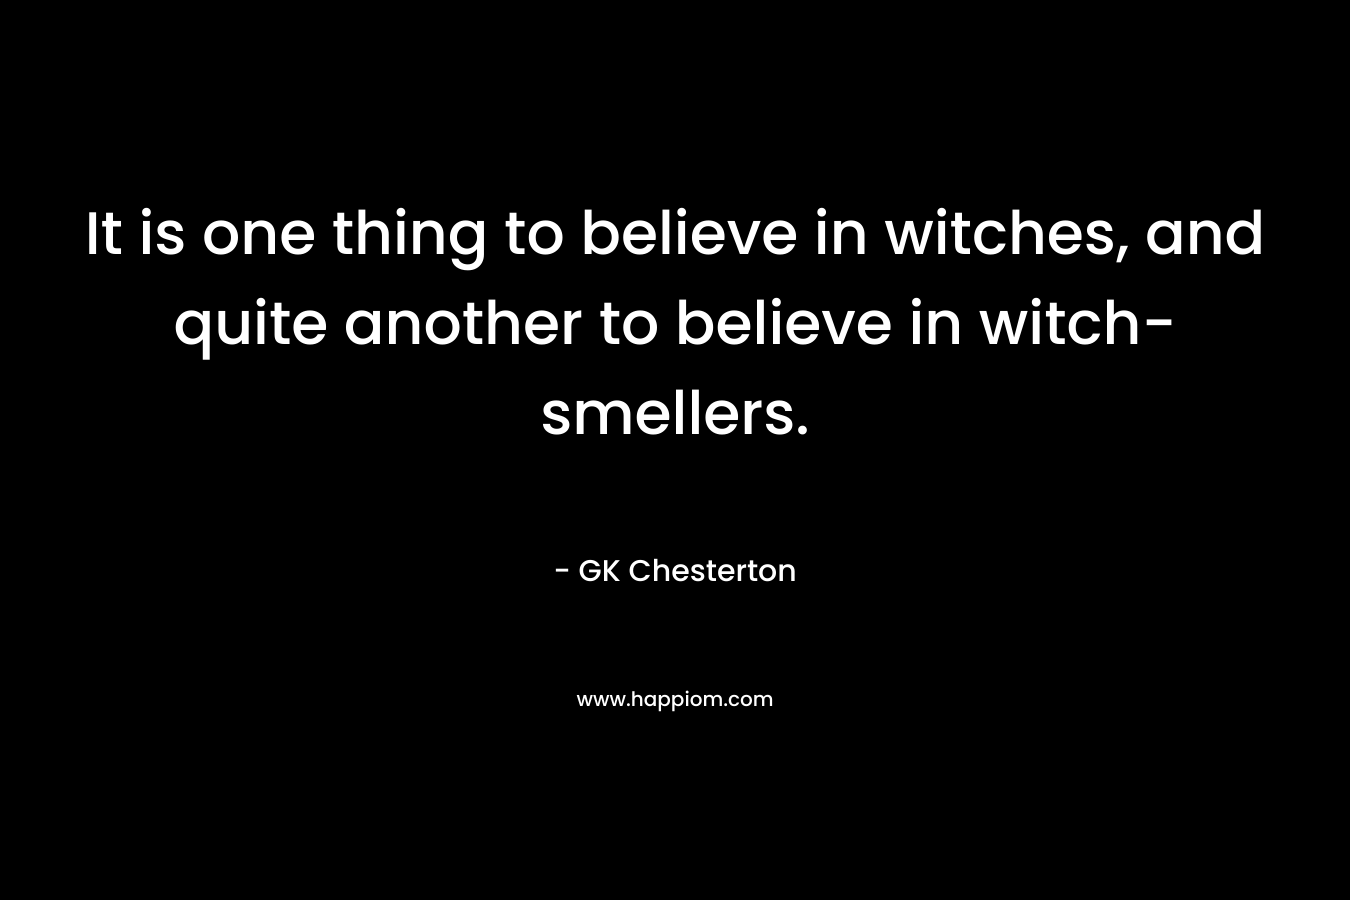 It is one thing to believe in witches, and quite another to believe in witch-smellers. – GK Chesterton